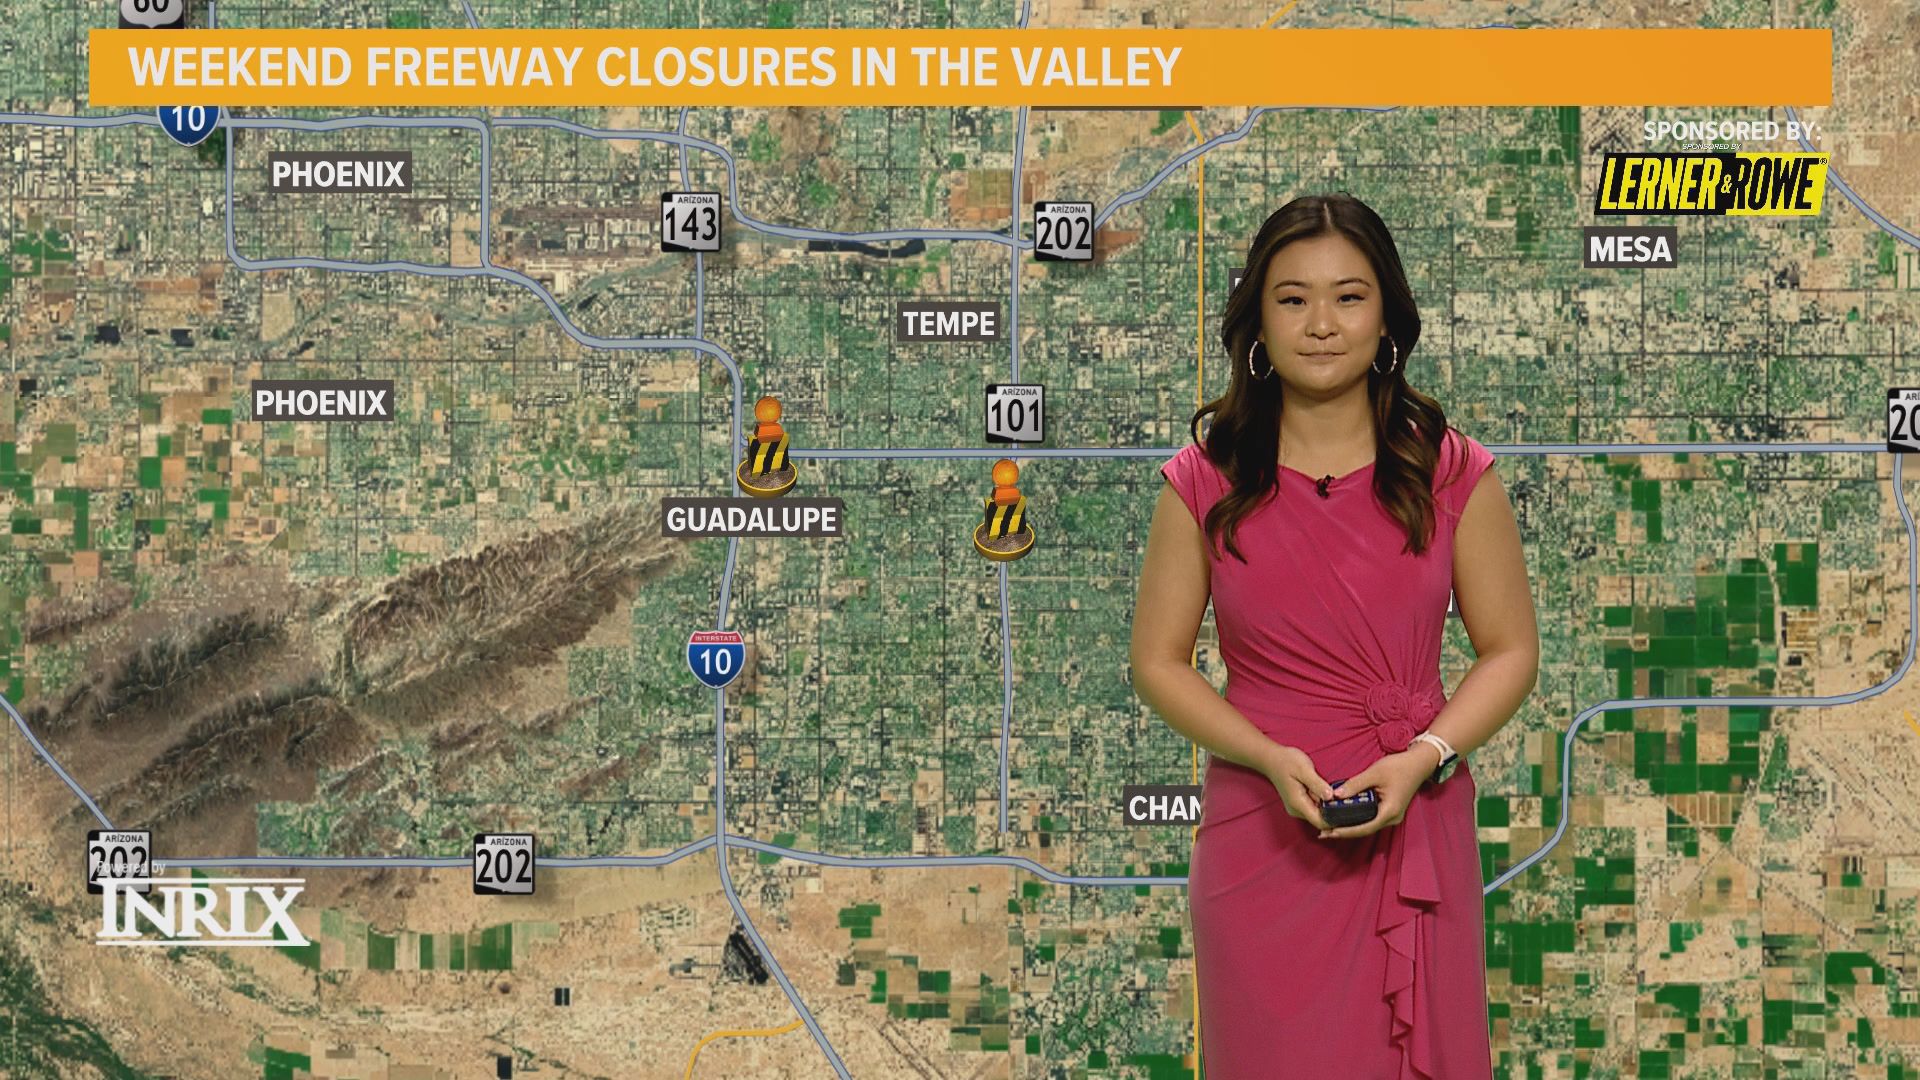 Stella Sun goes over the road closures and detours on Valley roads for April 26 weekend.